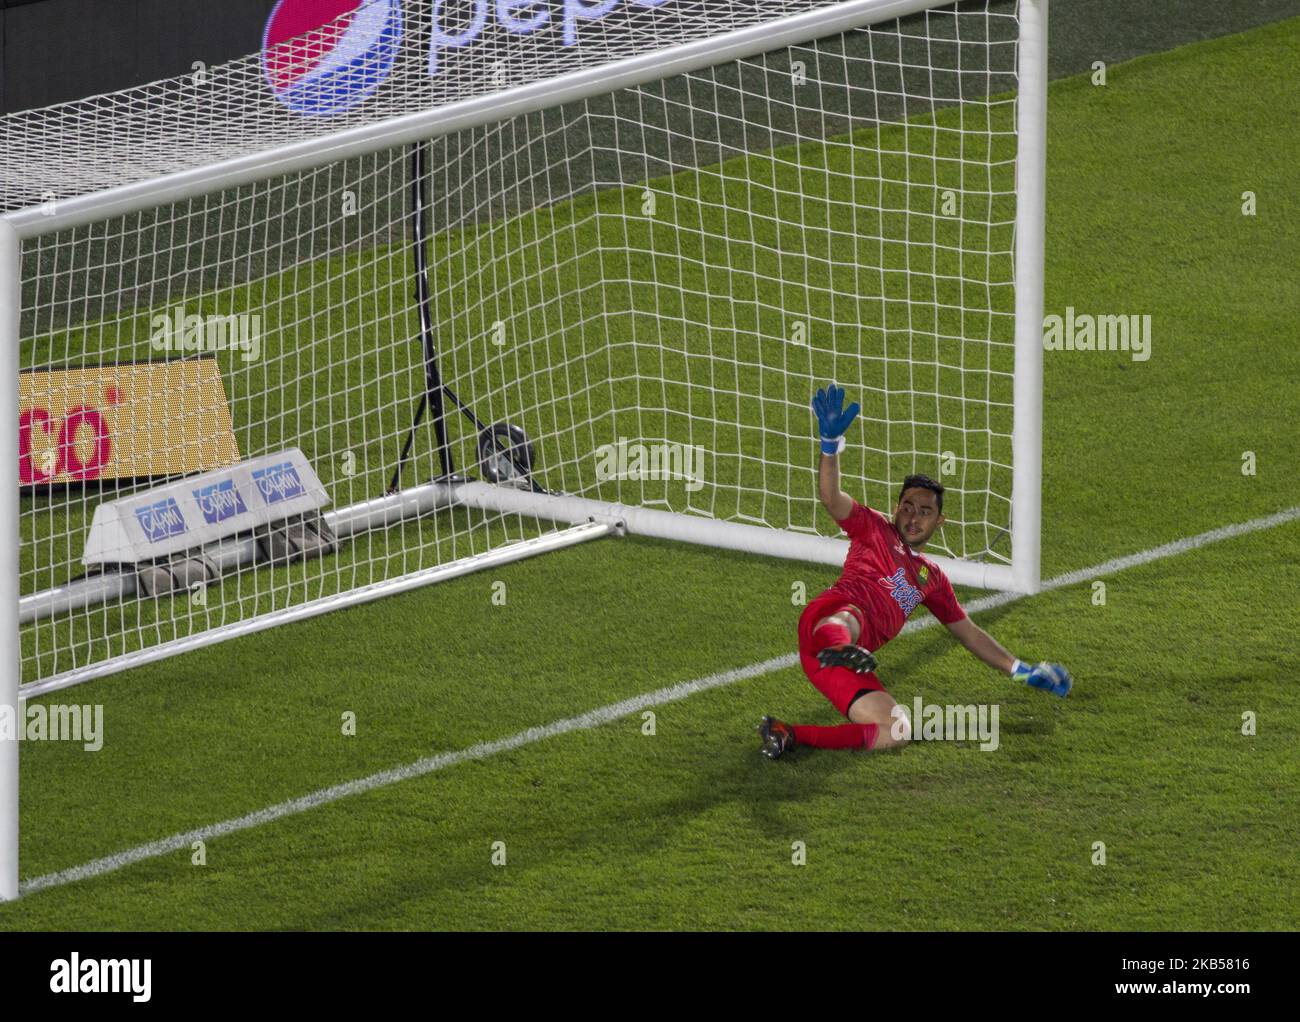 James Aguirre goalkeeper of Atletico Bucaramanga tries to cover the penalty shot during Primera A Colombia football match between Millonarios and Atletico Bucaramanga at Stadium Nemesio Camacho in Bogota, Colombia, on 3 February 2019. (Photo by Daniel Garzon Herazo/NurPhoto) Stock Photo